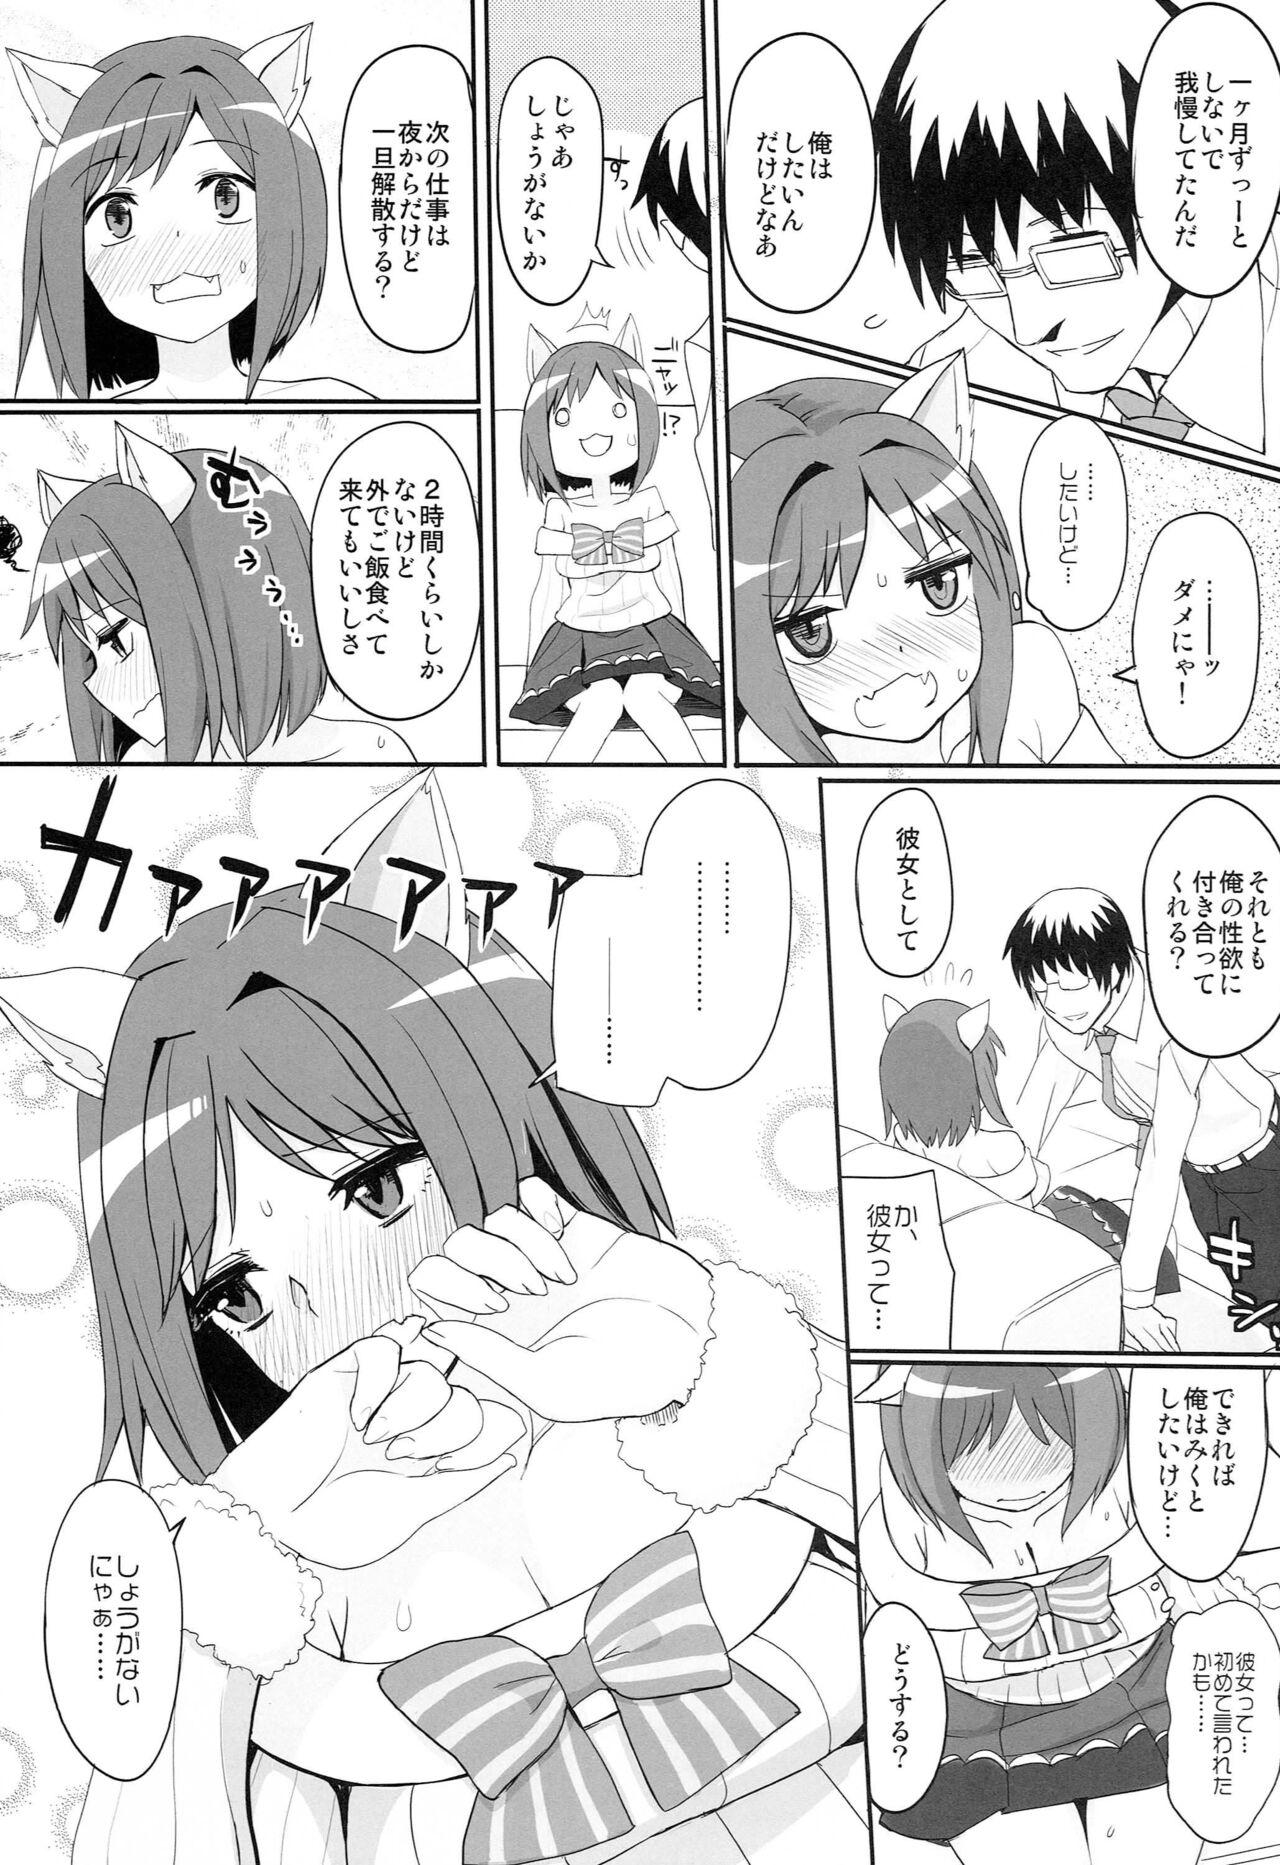 Dancing JUST MY CAT - The idolmaster Adolescente - Page 6